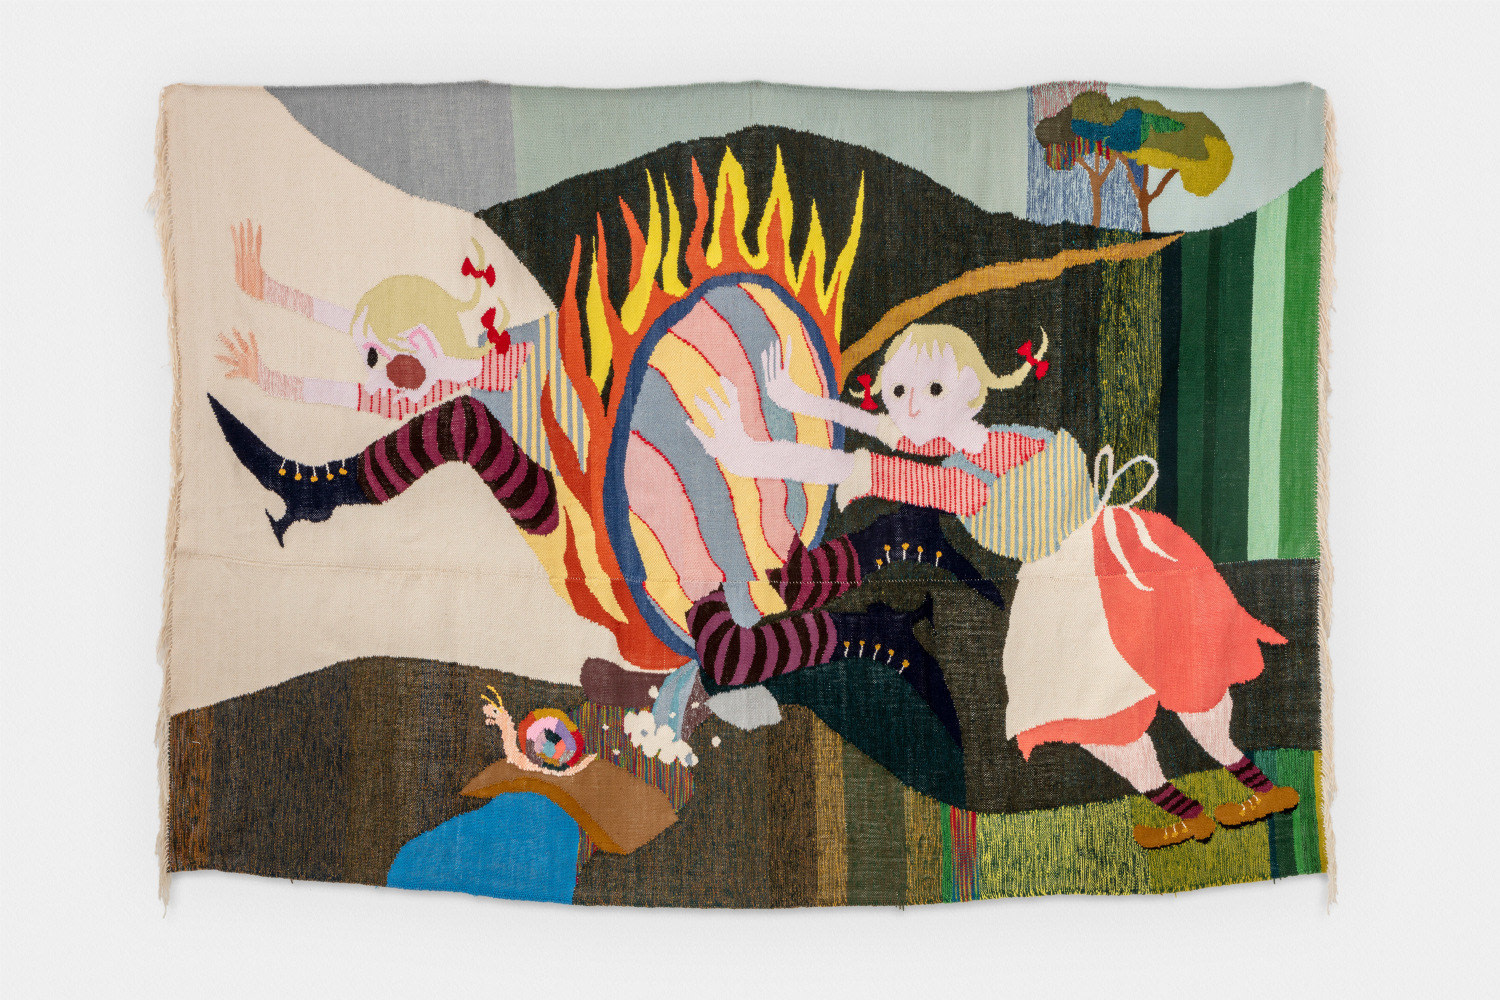 tapestry of 2 women jumping through a hoop of fire